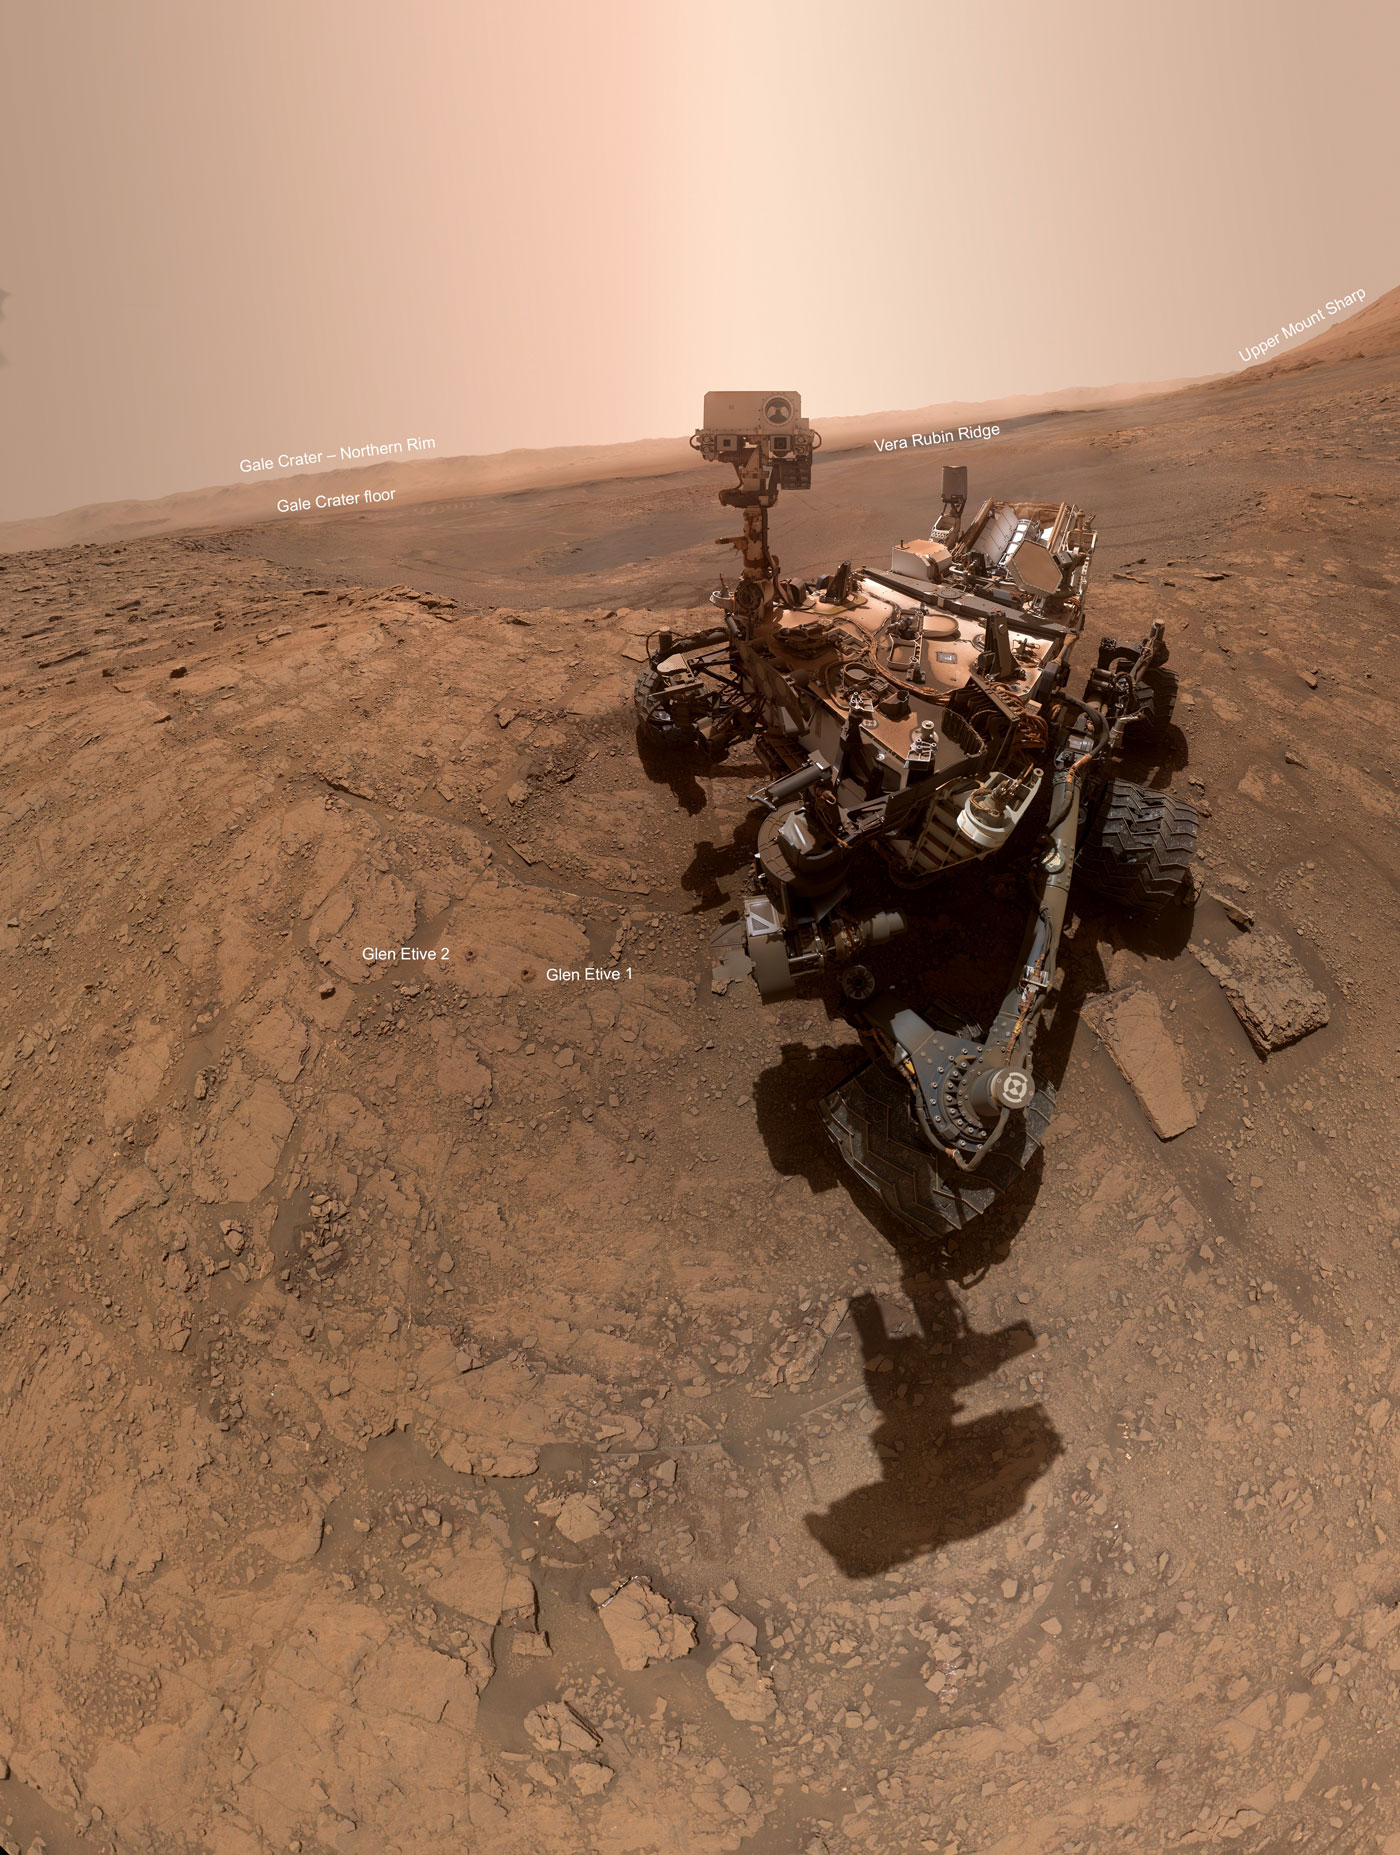 NASA's Curiosity rover took this selfie on Oct. 11, 2019, the 2,553rd Martian day, or sol, of its mission. The rover drilled twice in this location, which is nicknamed "Glen Etive."